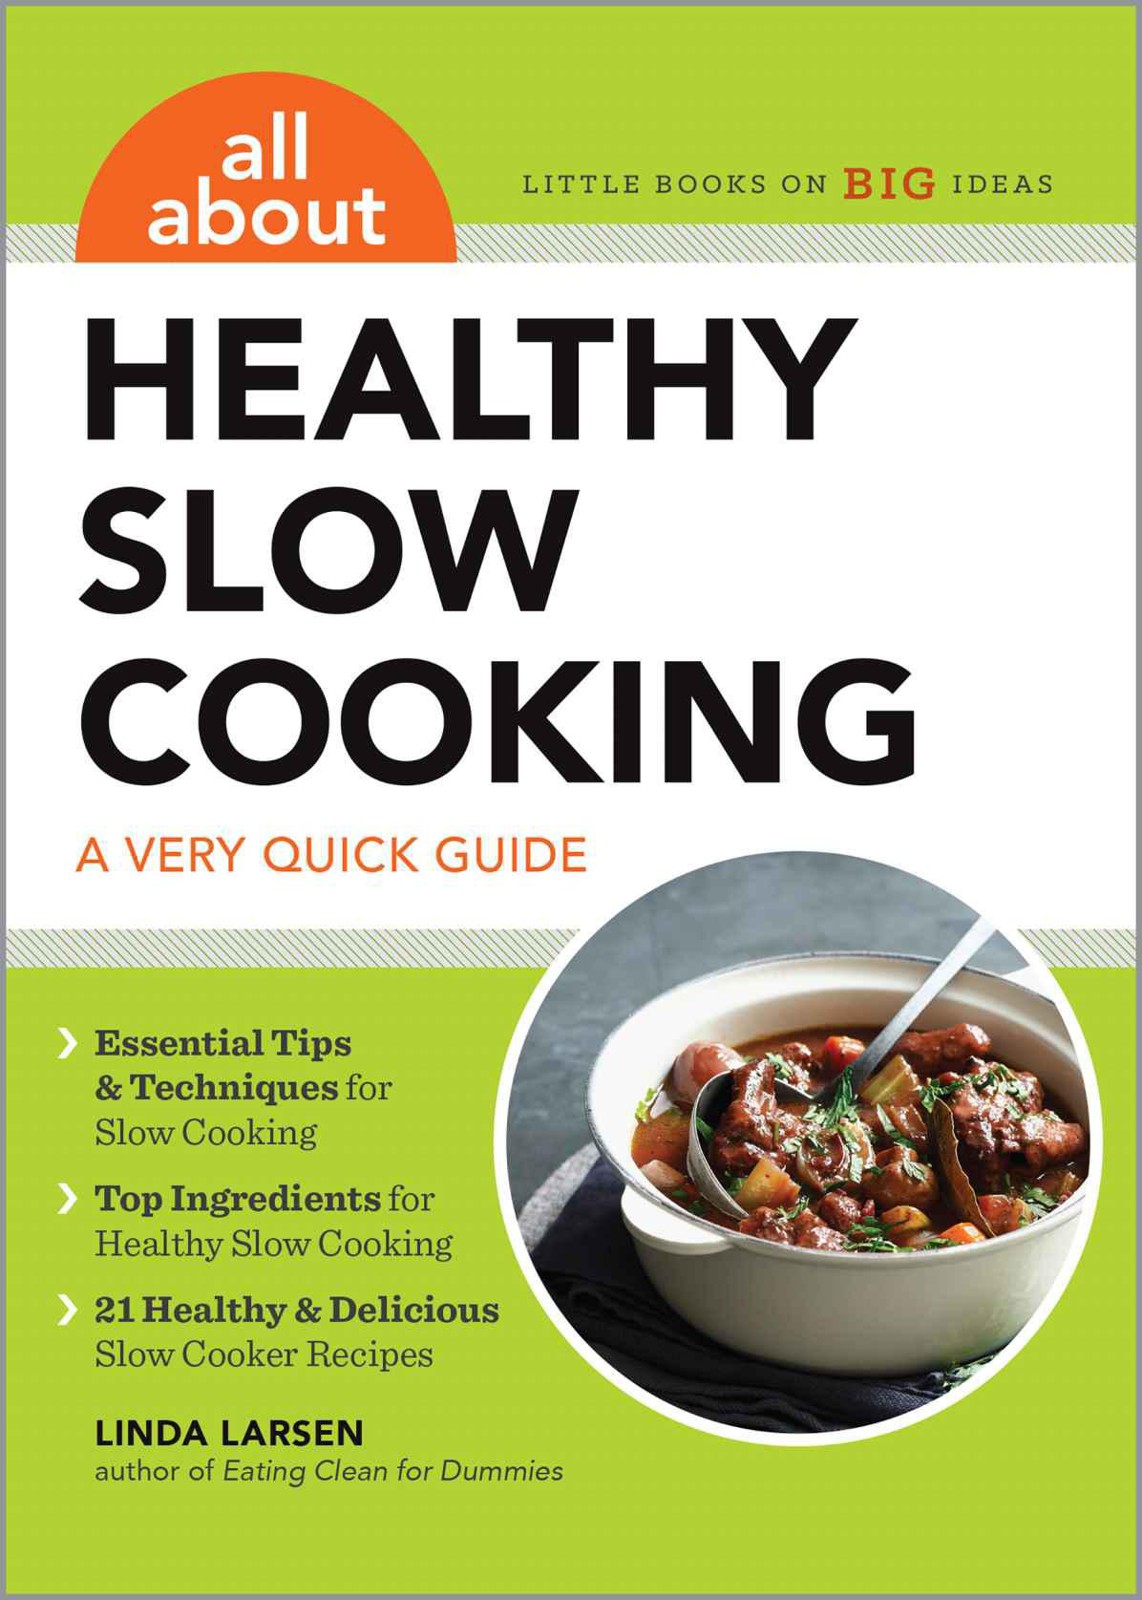 All About Healthy Slow Cooking: A Very Quick Guide by Larsen Linda